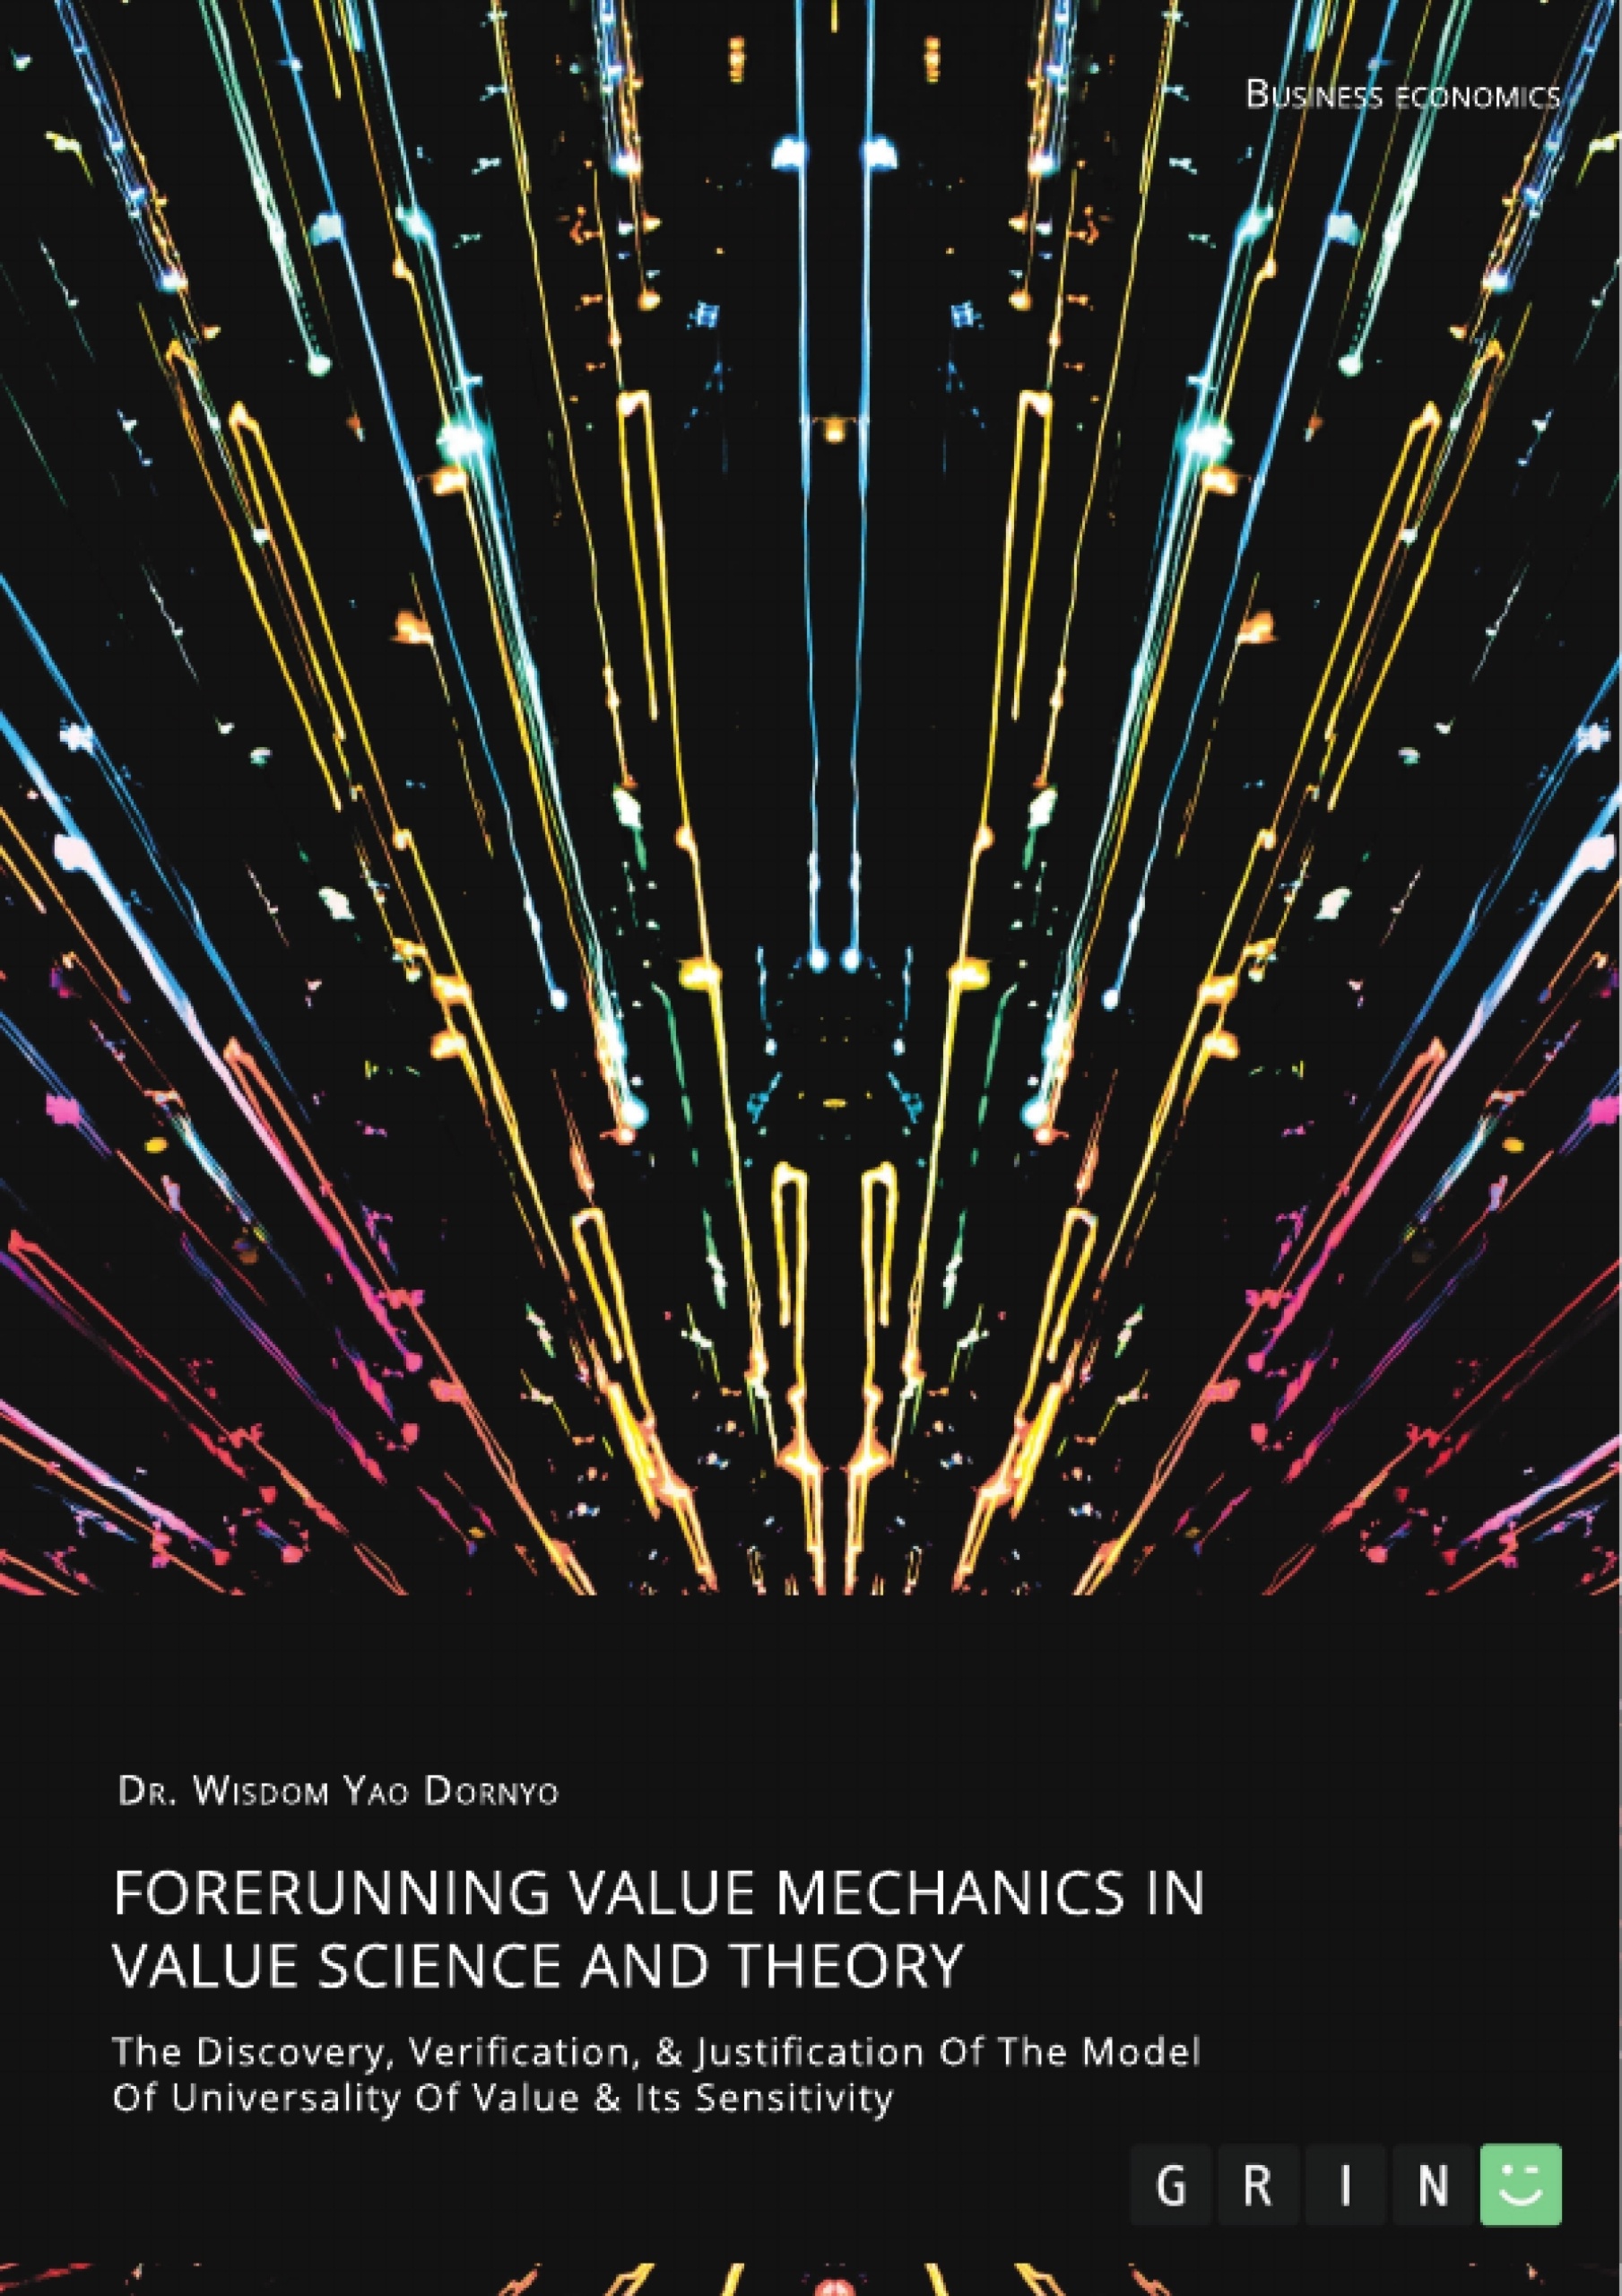 Título: Forerunning Value Mechanics In Value Science And Theory. The Discovery, Verification, &
Justification Of The Model Of Universality Of Value & Its Sensitivity